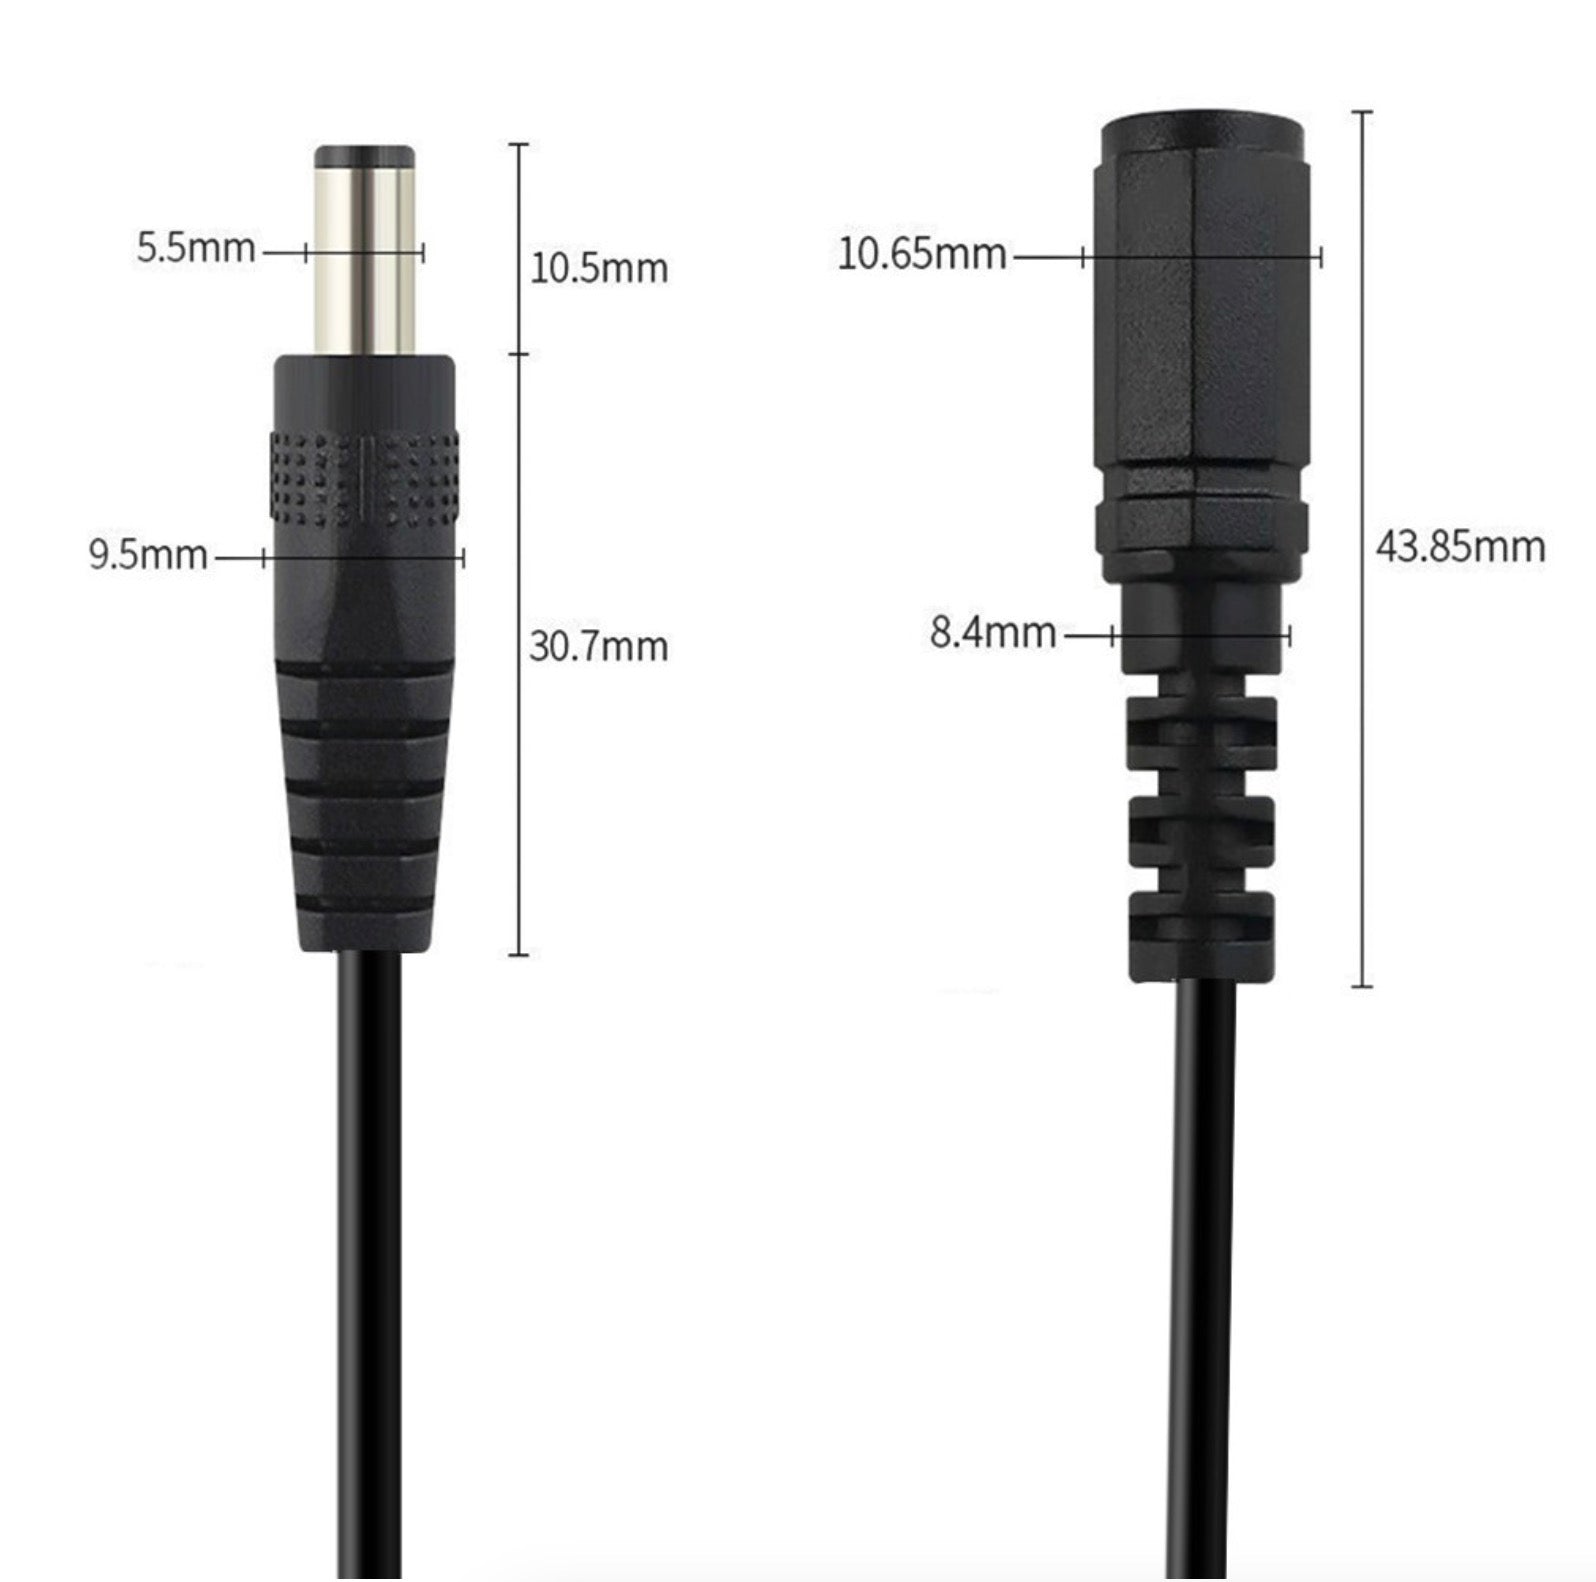 5.5 x 2.5mm Female DC Power Jack Connector Cable for Led Strip CCTV Camera